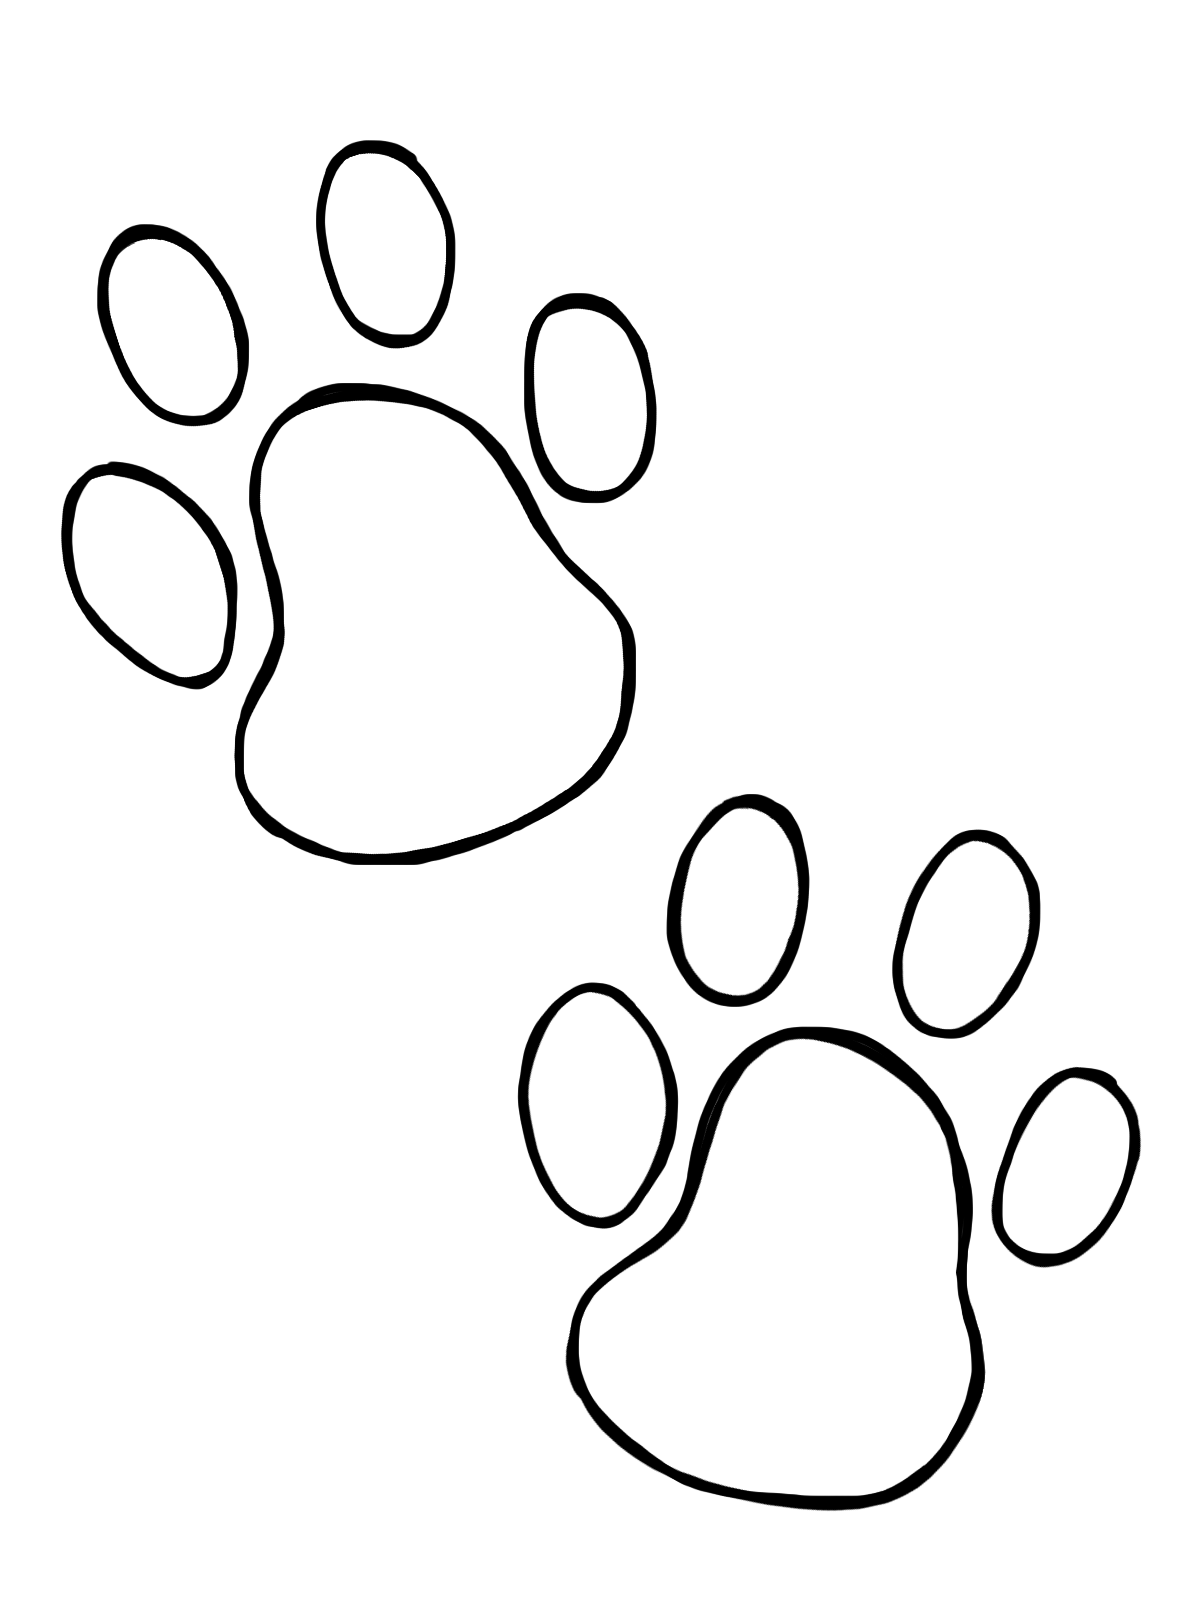 Dog paw heart clip art free clipart images